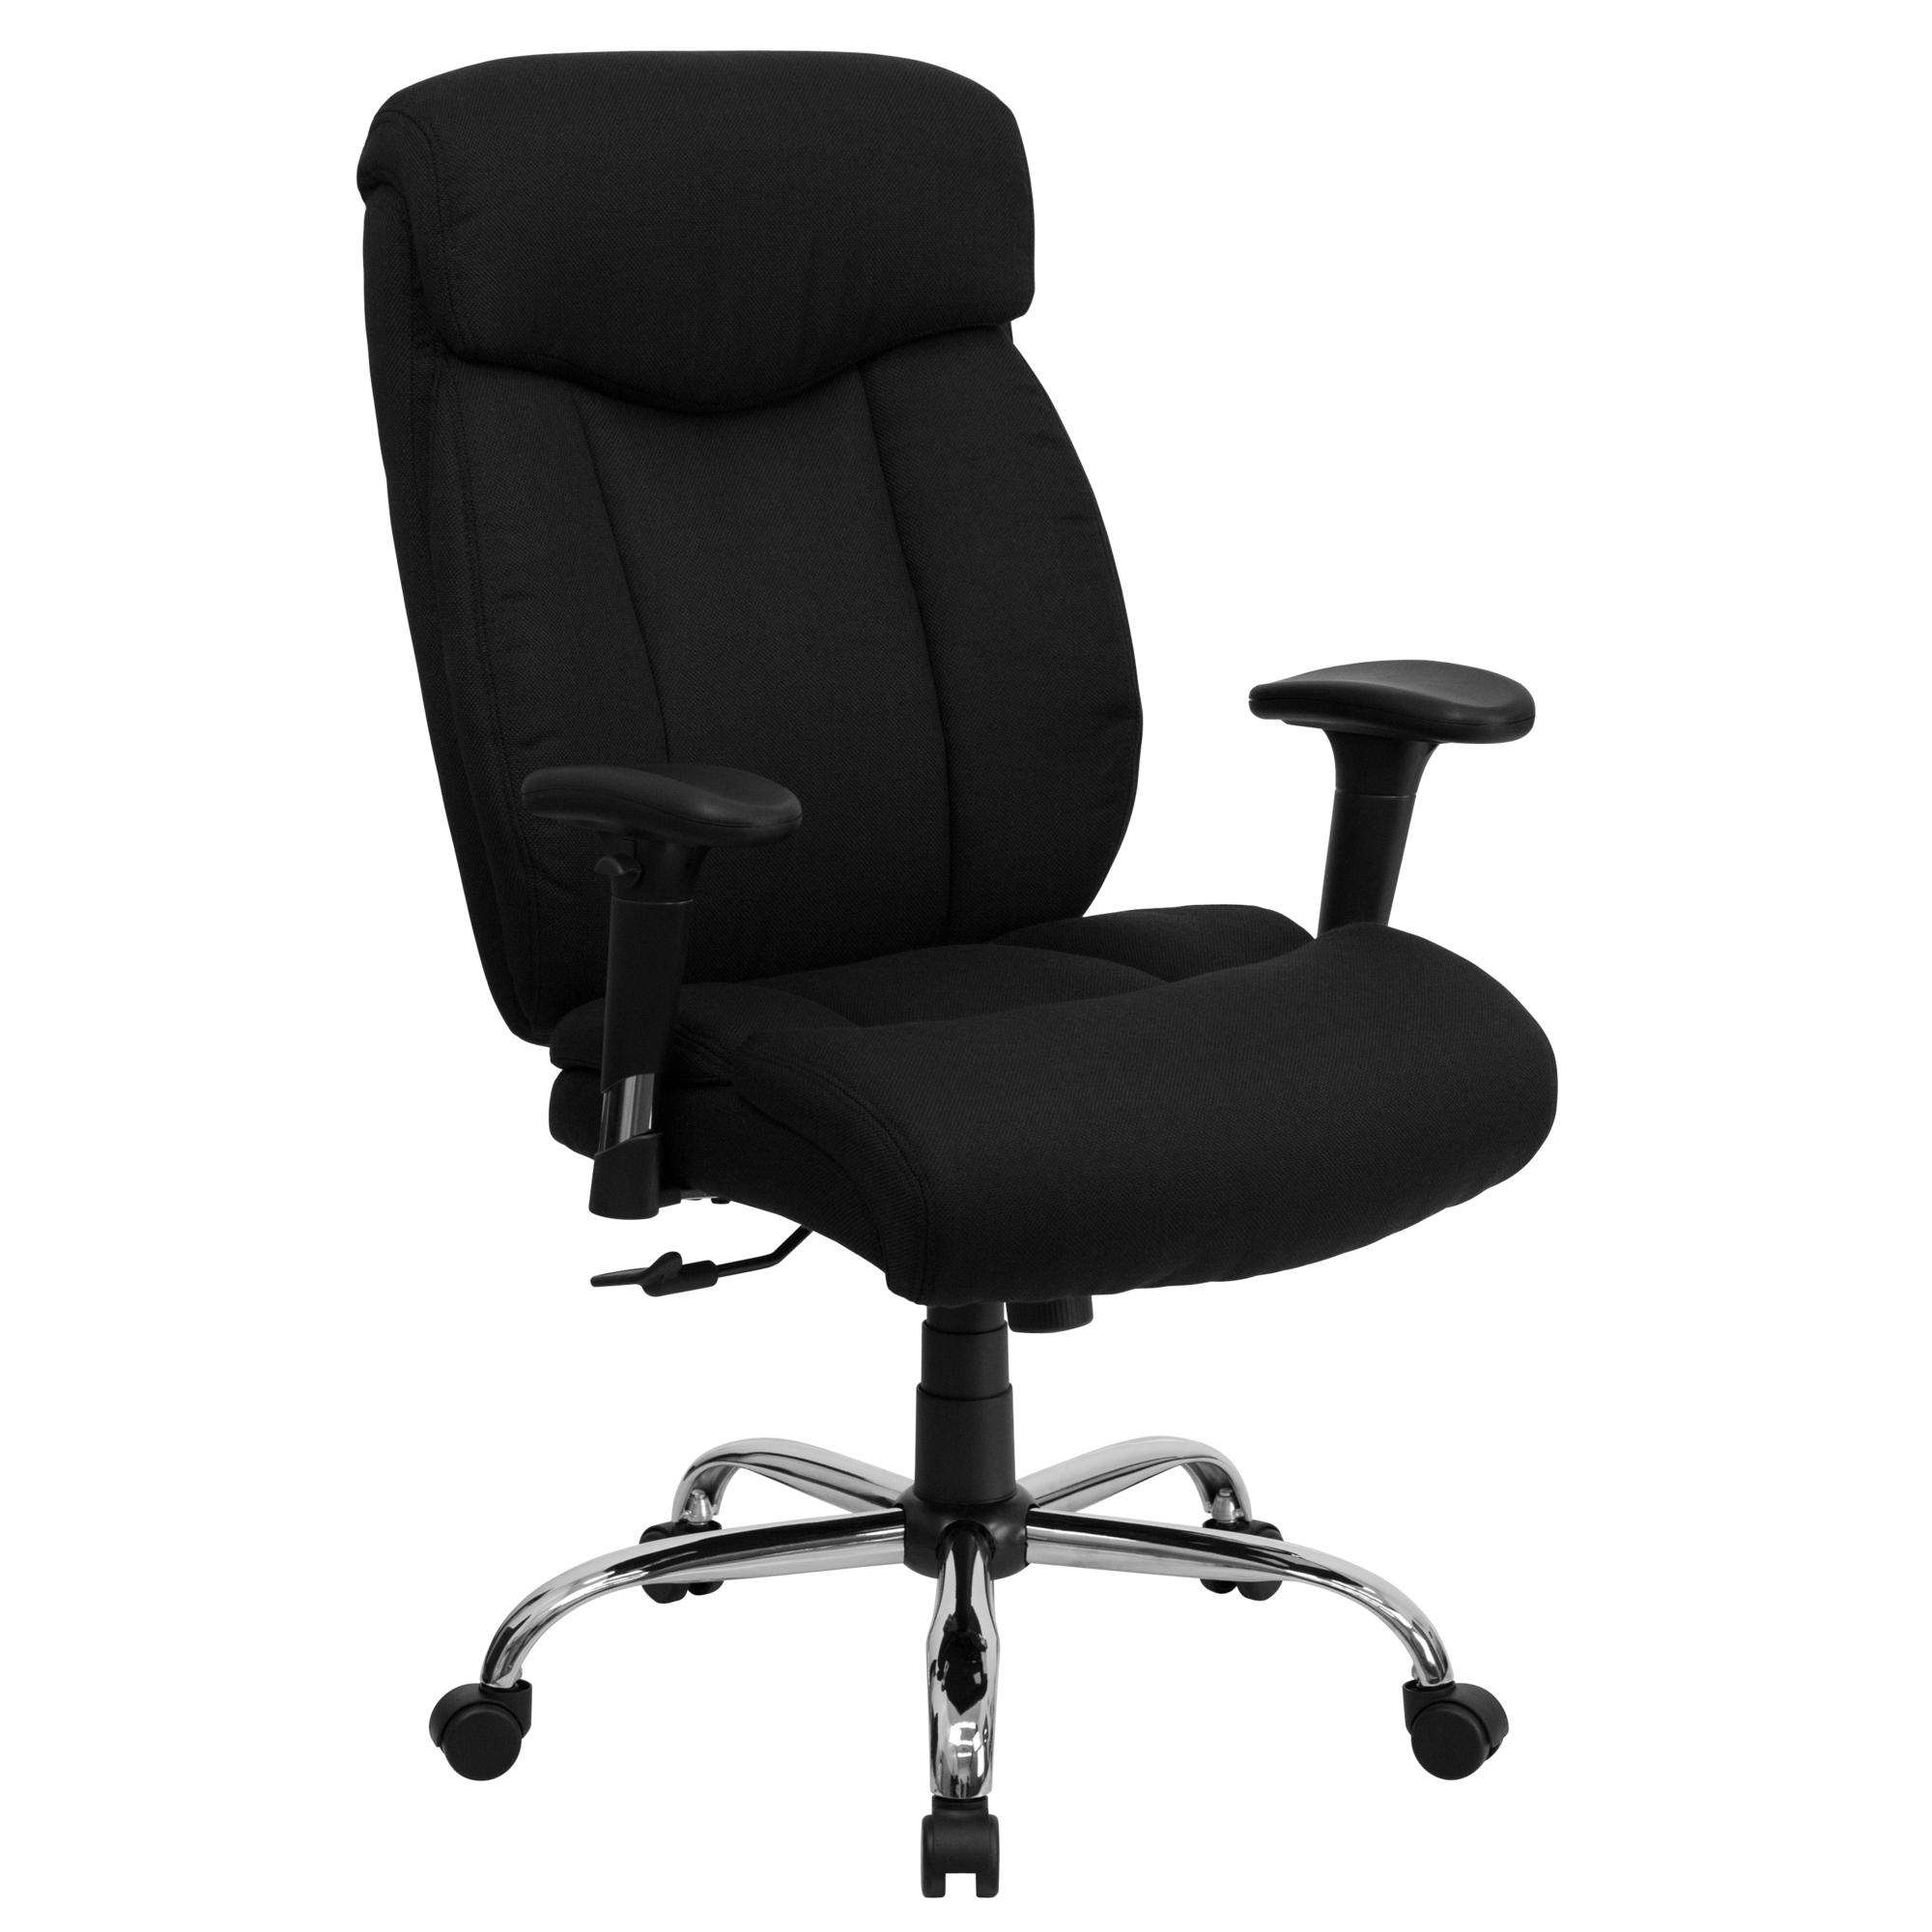 Flash Furniture, Big Tall 400 lb. Rated Black Fabric Chair, Primary Color Black, Included (qty.) 1, Model GO1235BKFABA